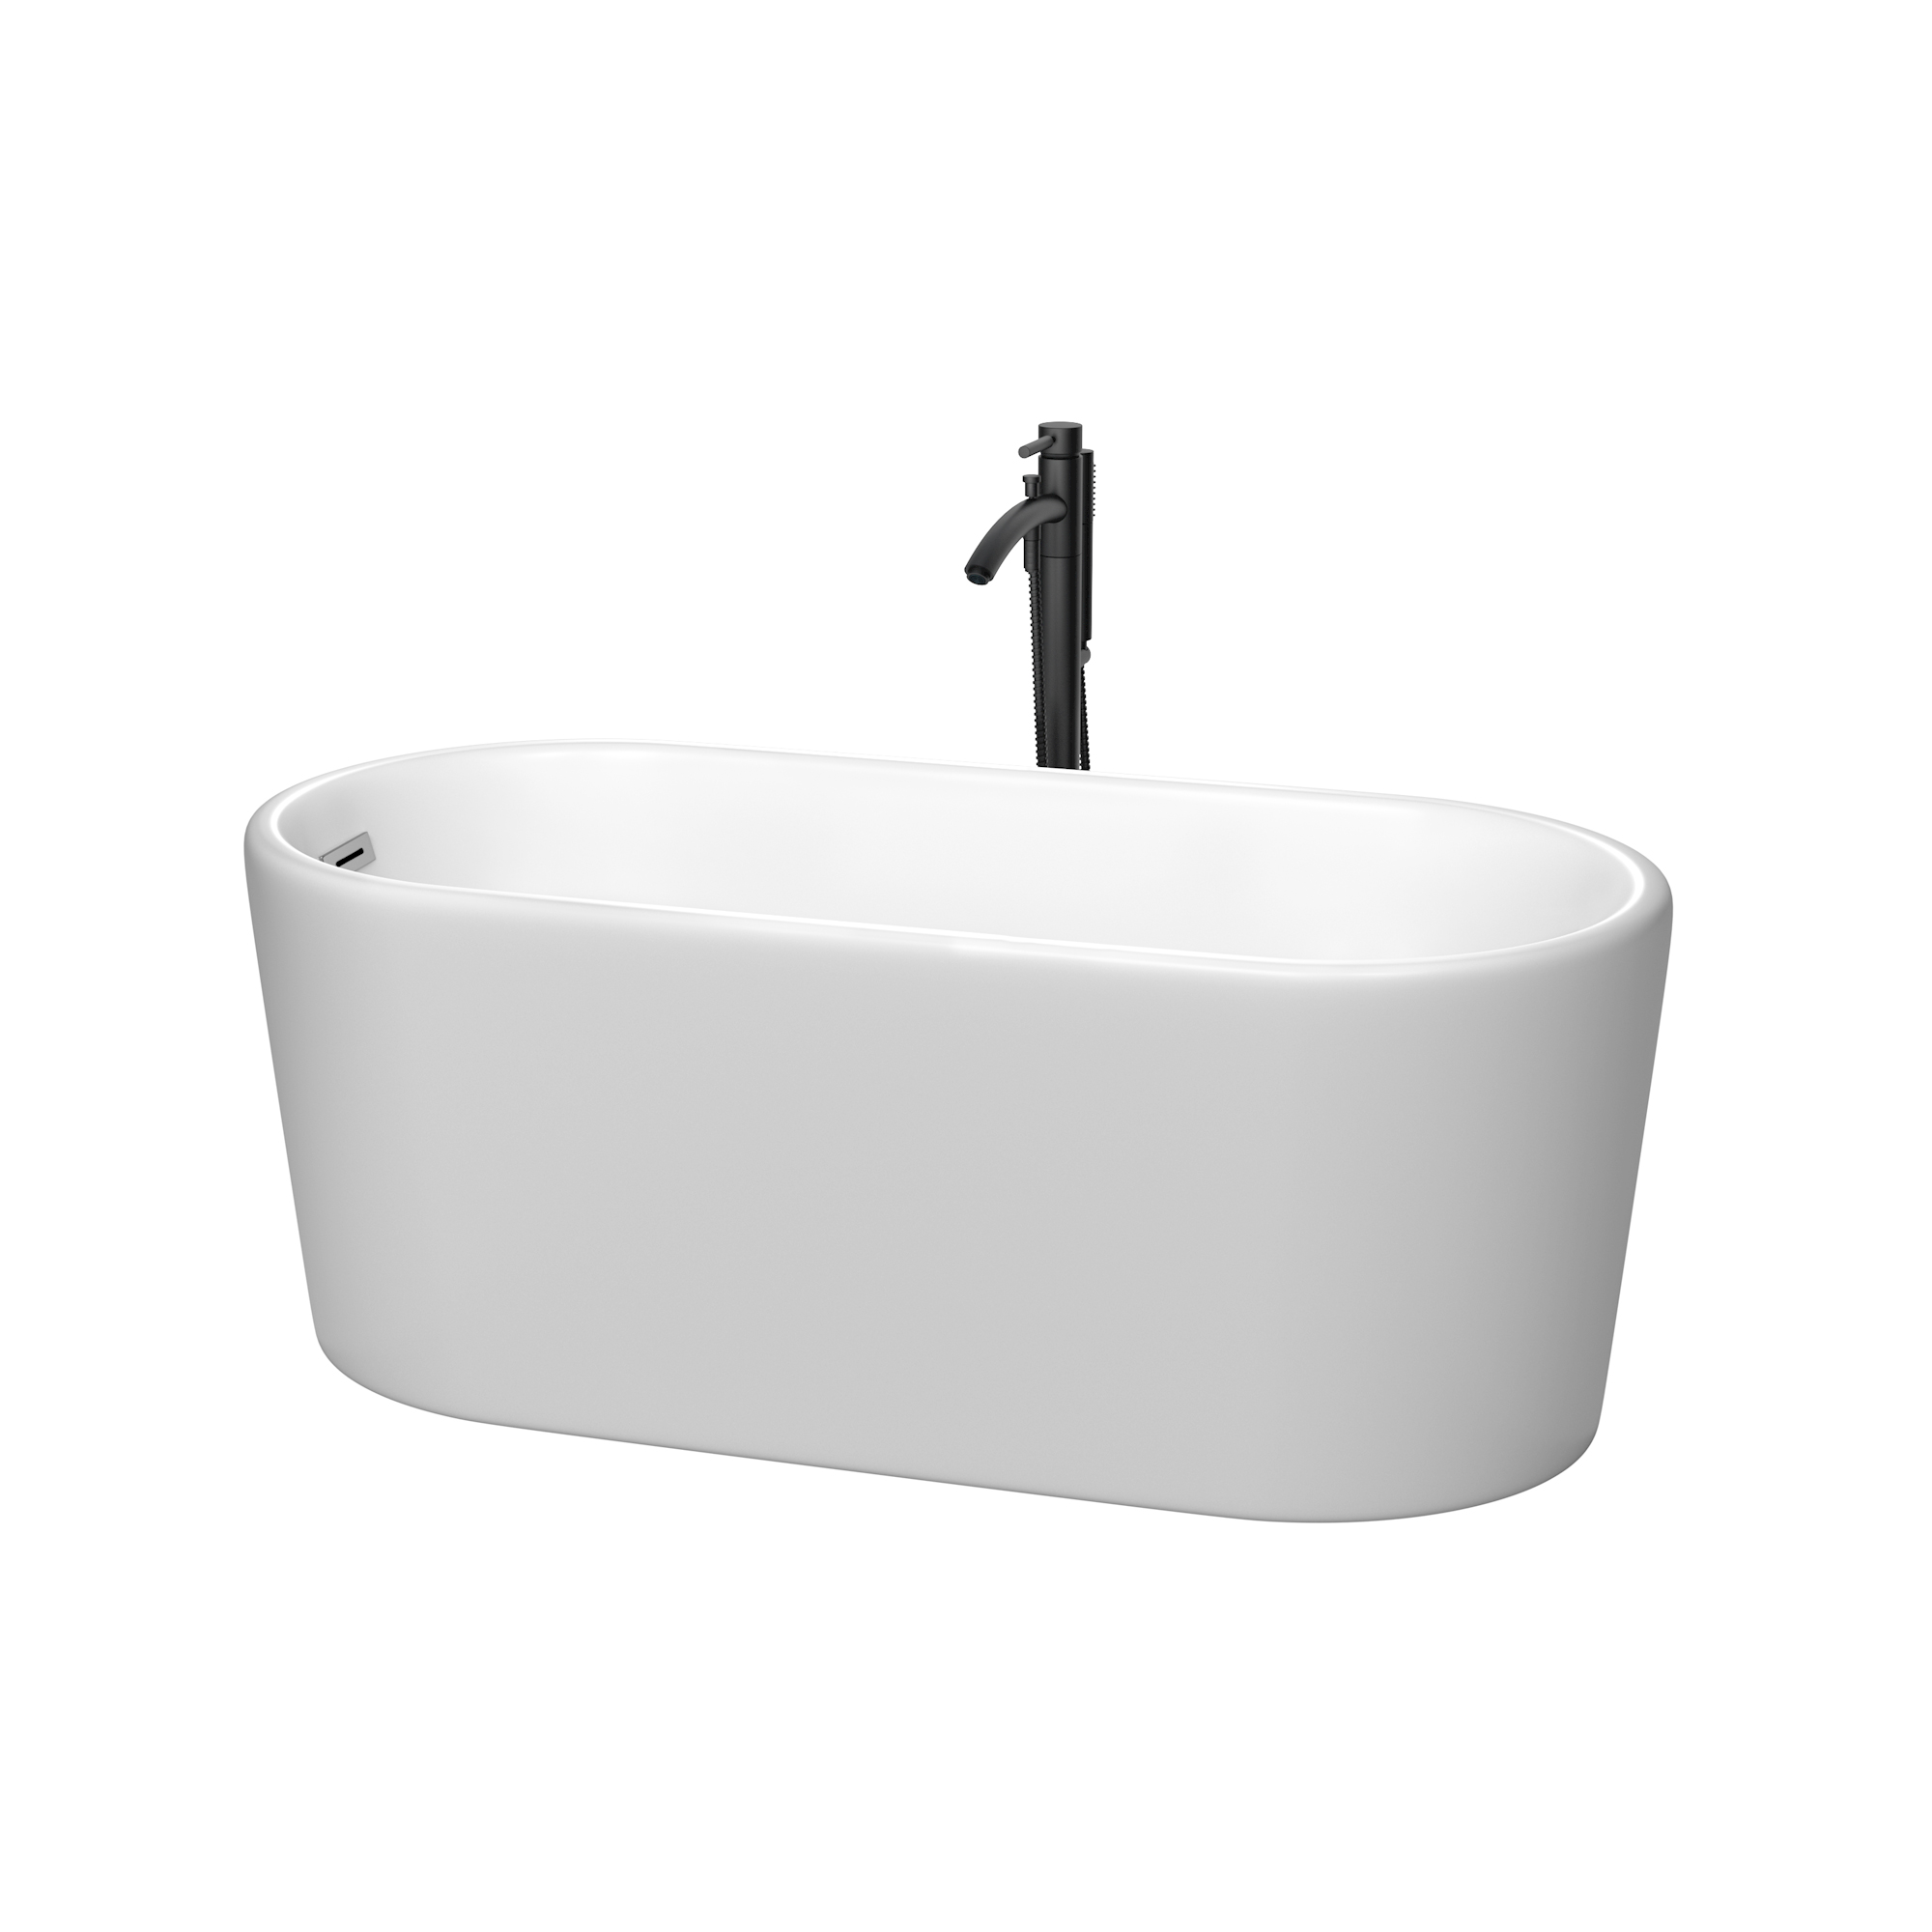 59" Freestanding Bathtub in Matte White with Polished Chrome Trim and Floor Mounted Faucet in Matte Black